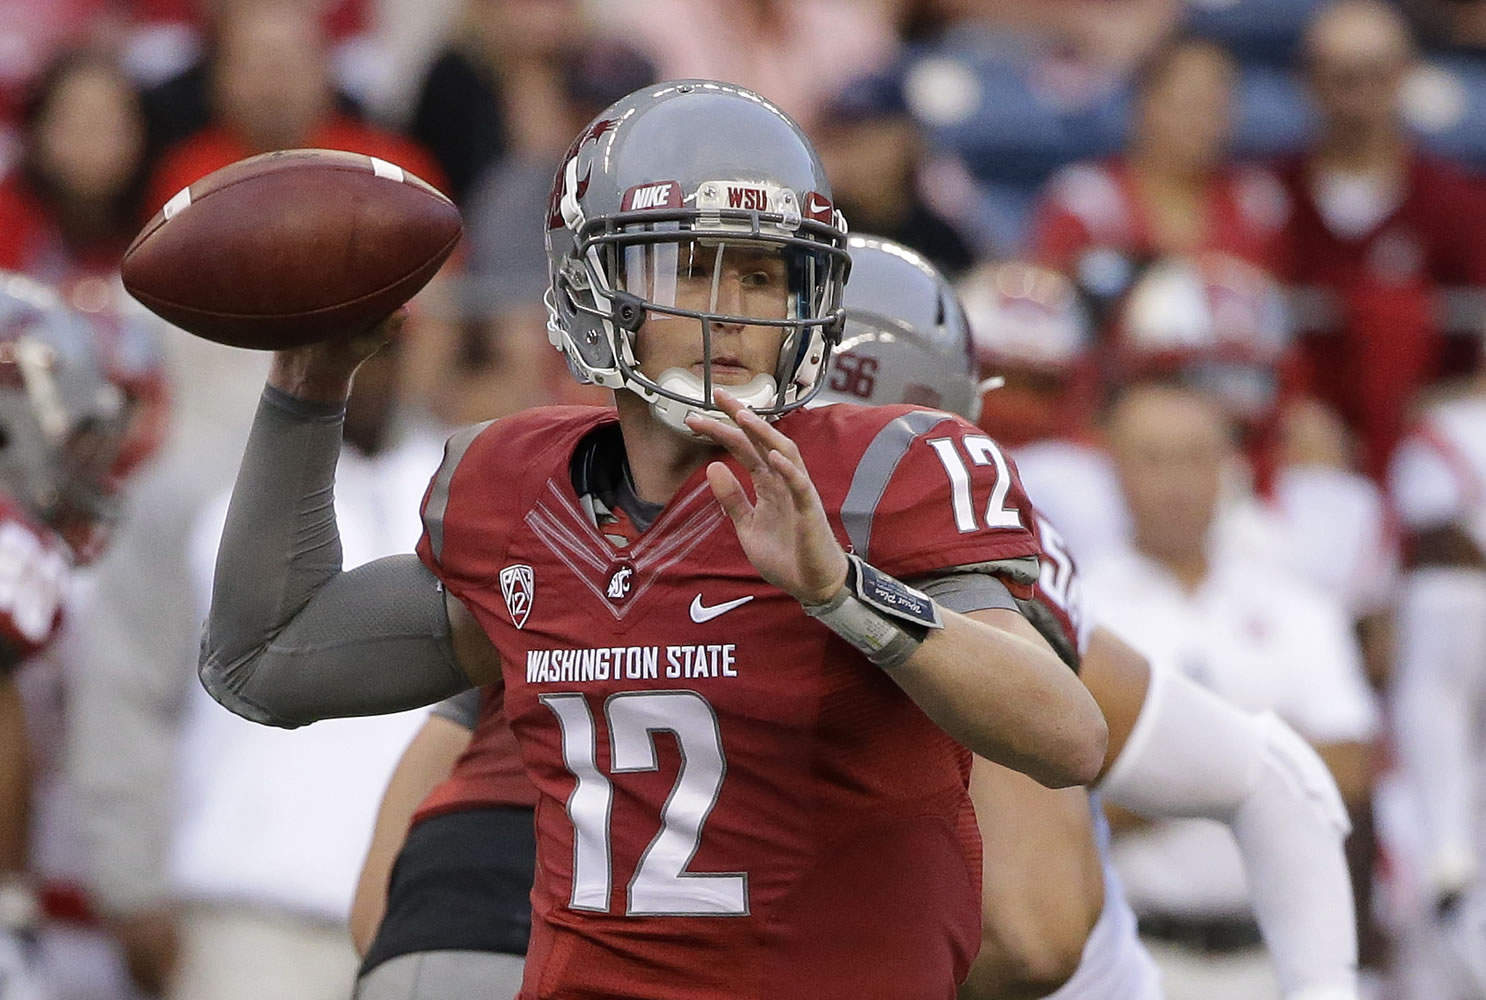 Connor Halliday threw for 532 yards and five touchdowns against Rutgers, but did not get the win